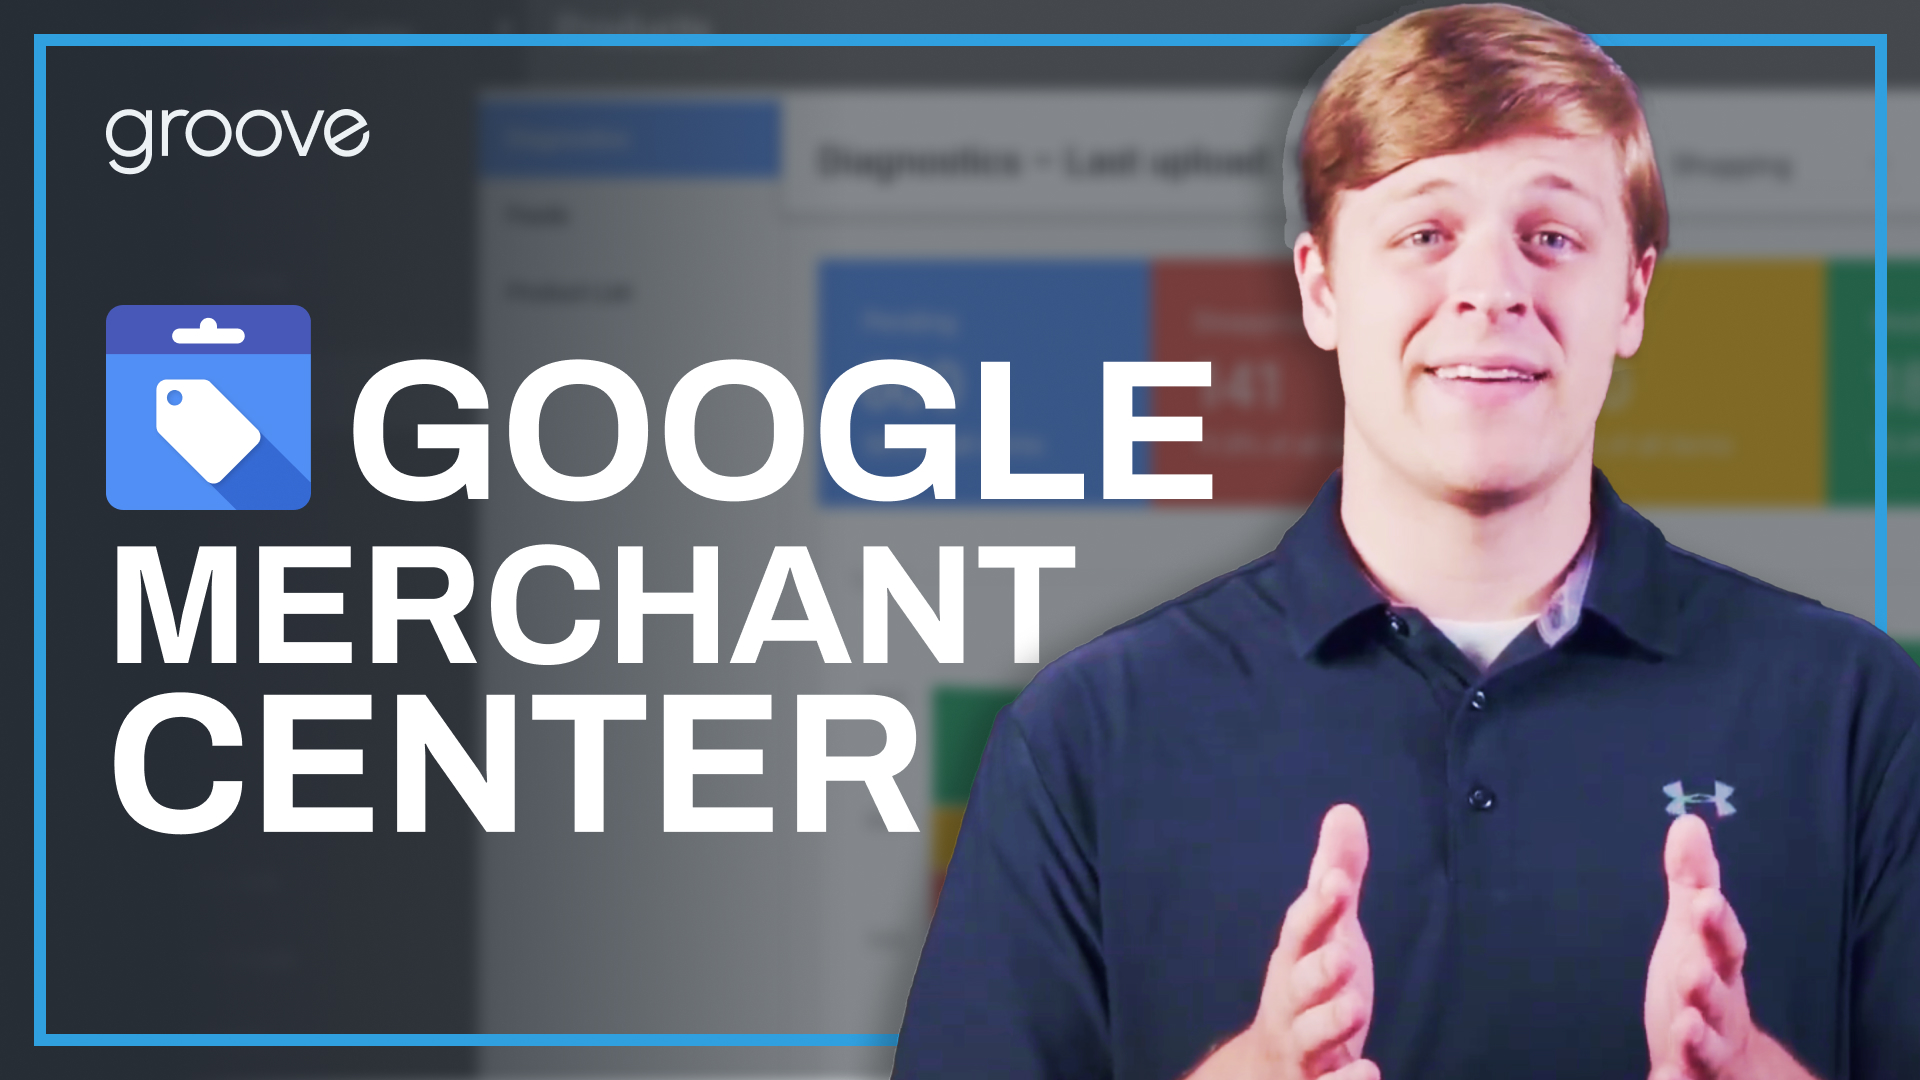 Google Merchant Center: Everything an eCommerce Merchant Needs to Know